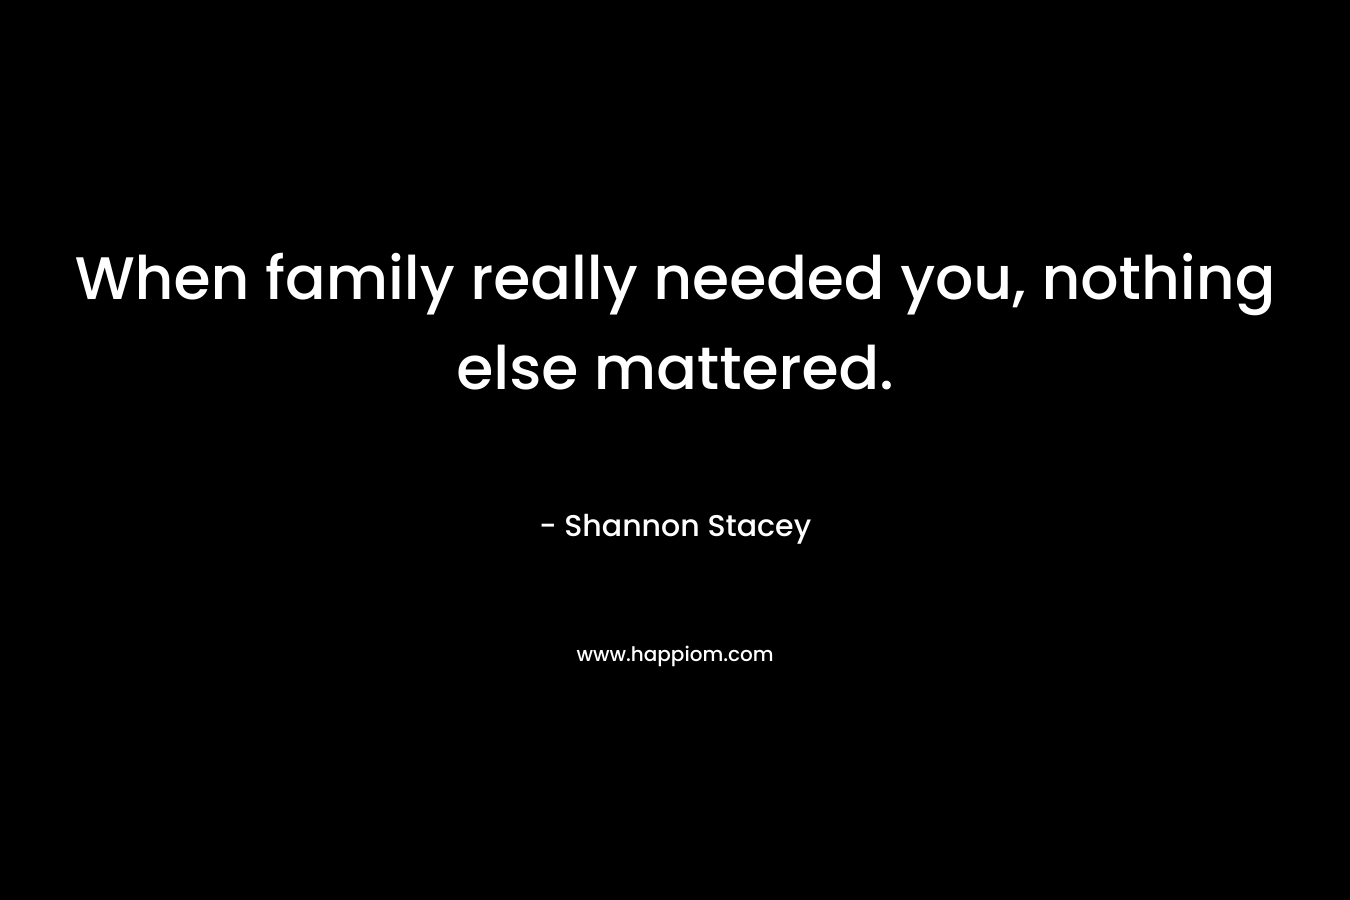 When family really needed you, nothing else mattered. – Shannon Stacey